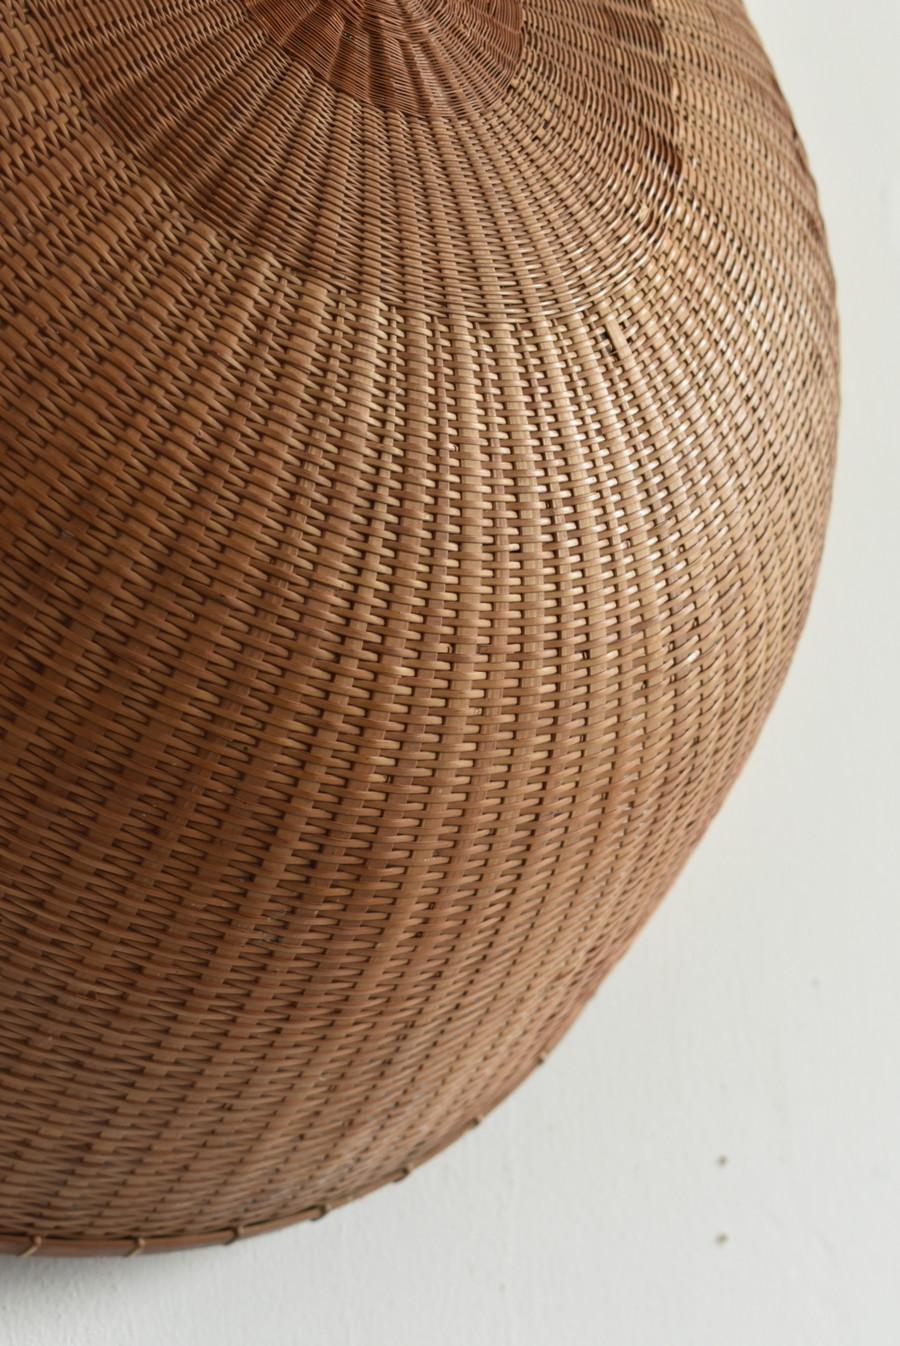 19th Century Japanese Antique Bamboo Hat/1868-1920/Folk Tools/Wall Hanging Decoration For Sale